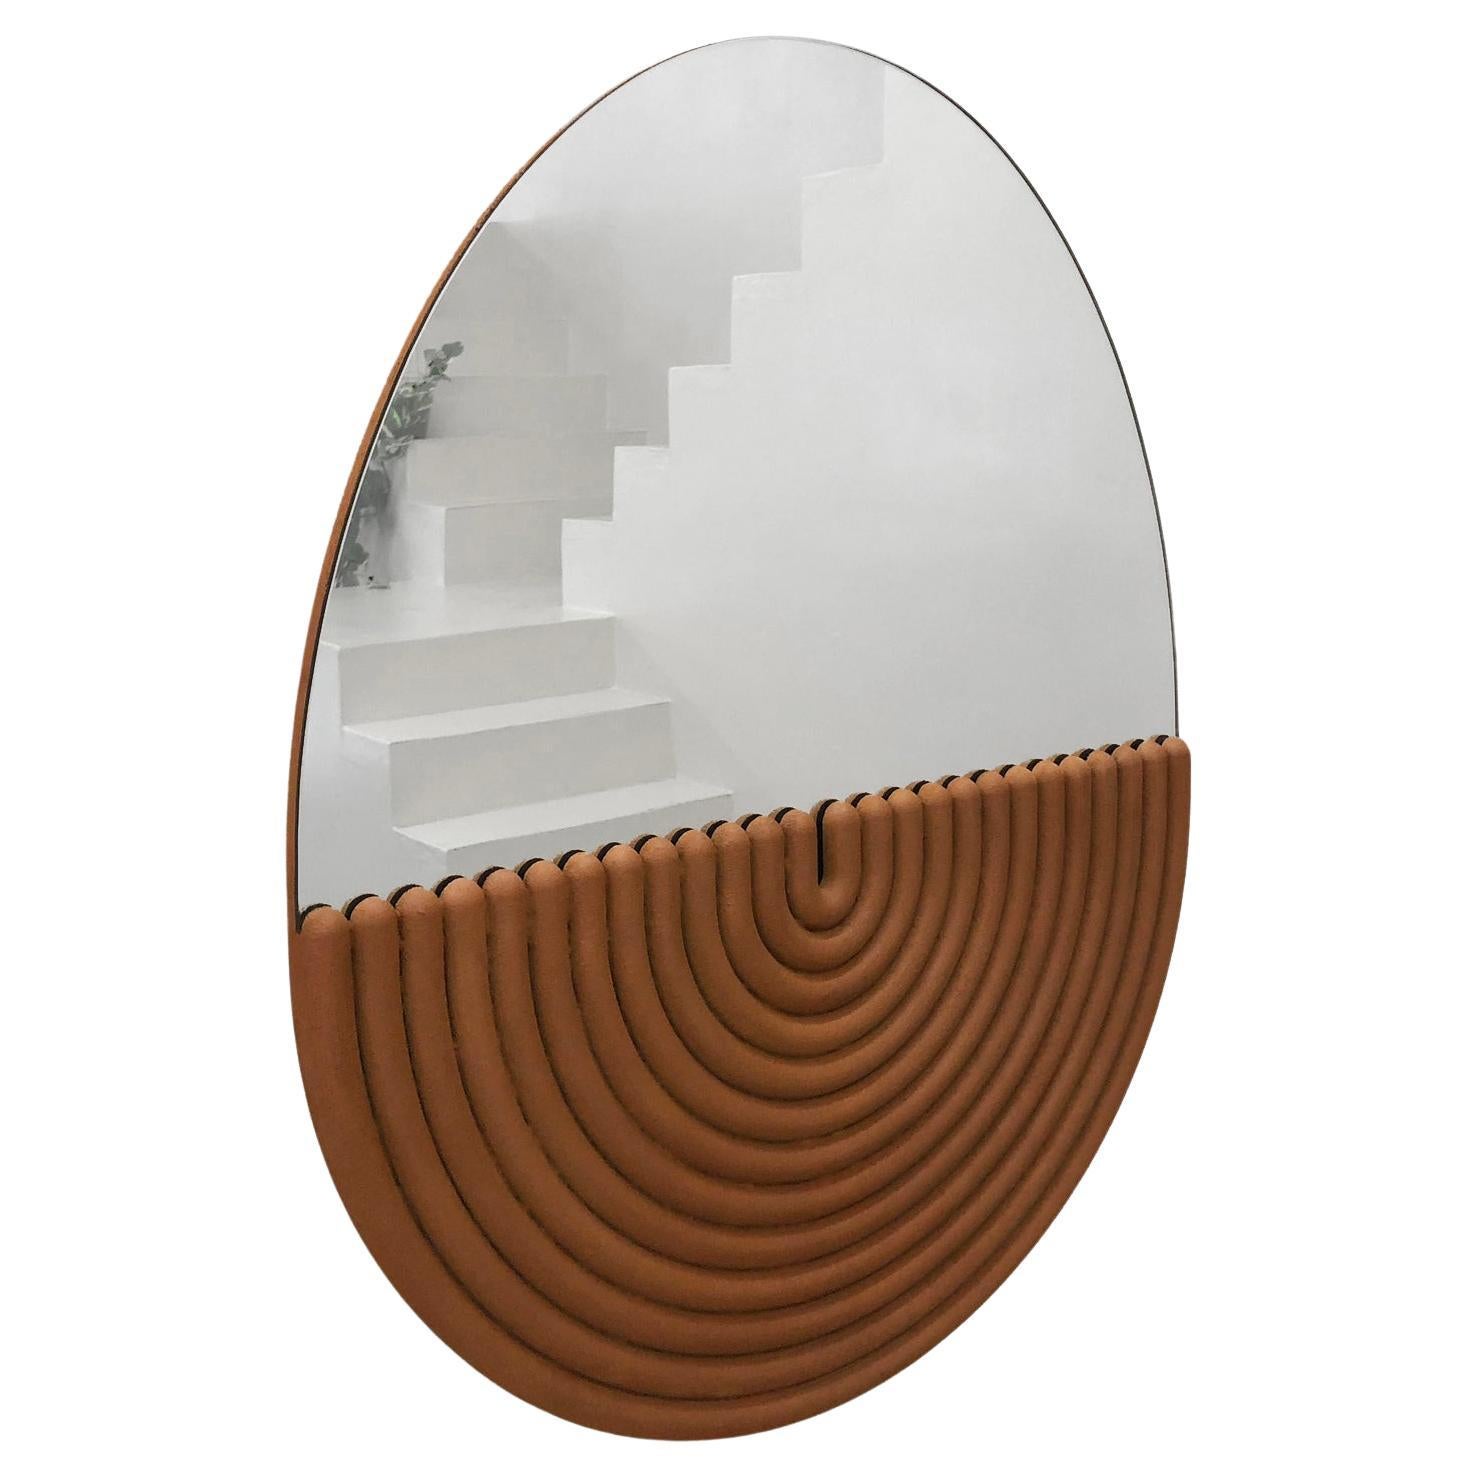 This modern hand-cast reinforced gypsum mirror is an original Ian C.R. Martin Studio piece. It features a striking, concentric design using a backcasting method that integrates the mirror seamlessly into its plaster frame.  The plaster is reinforced